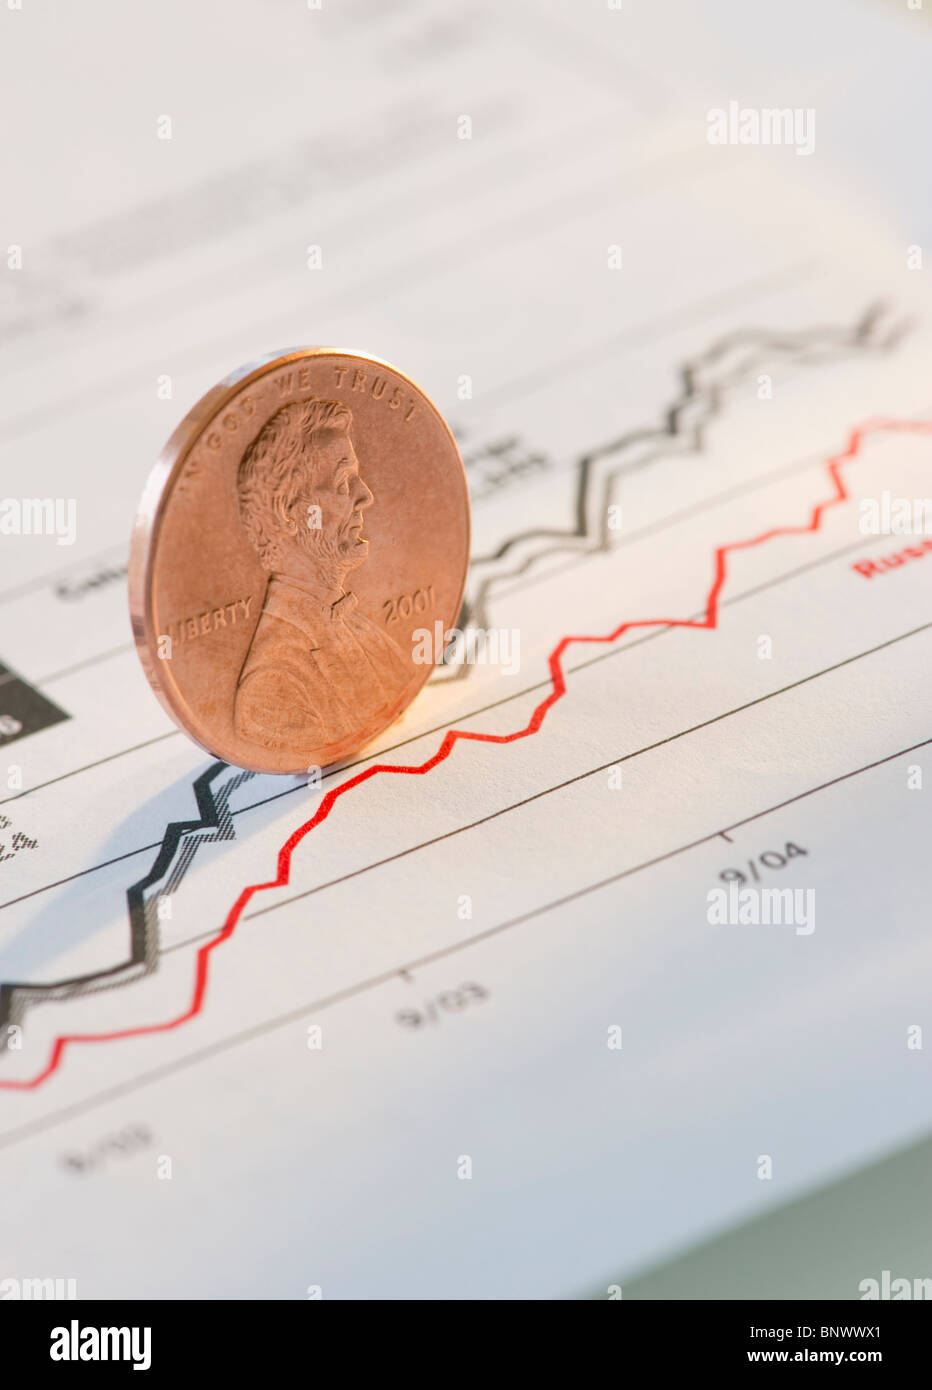 Penny on a graph Stock Photo